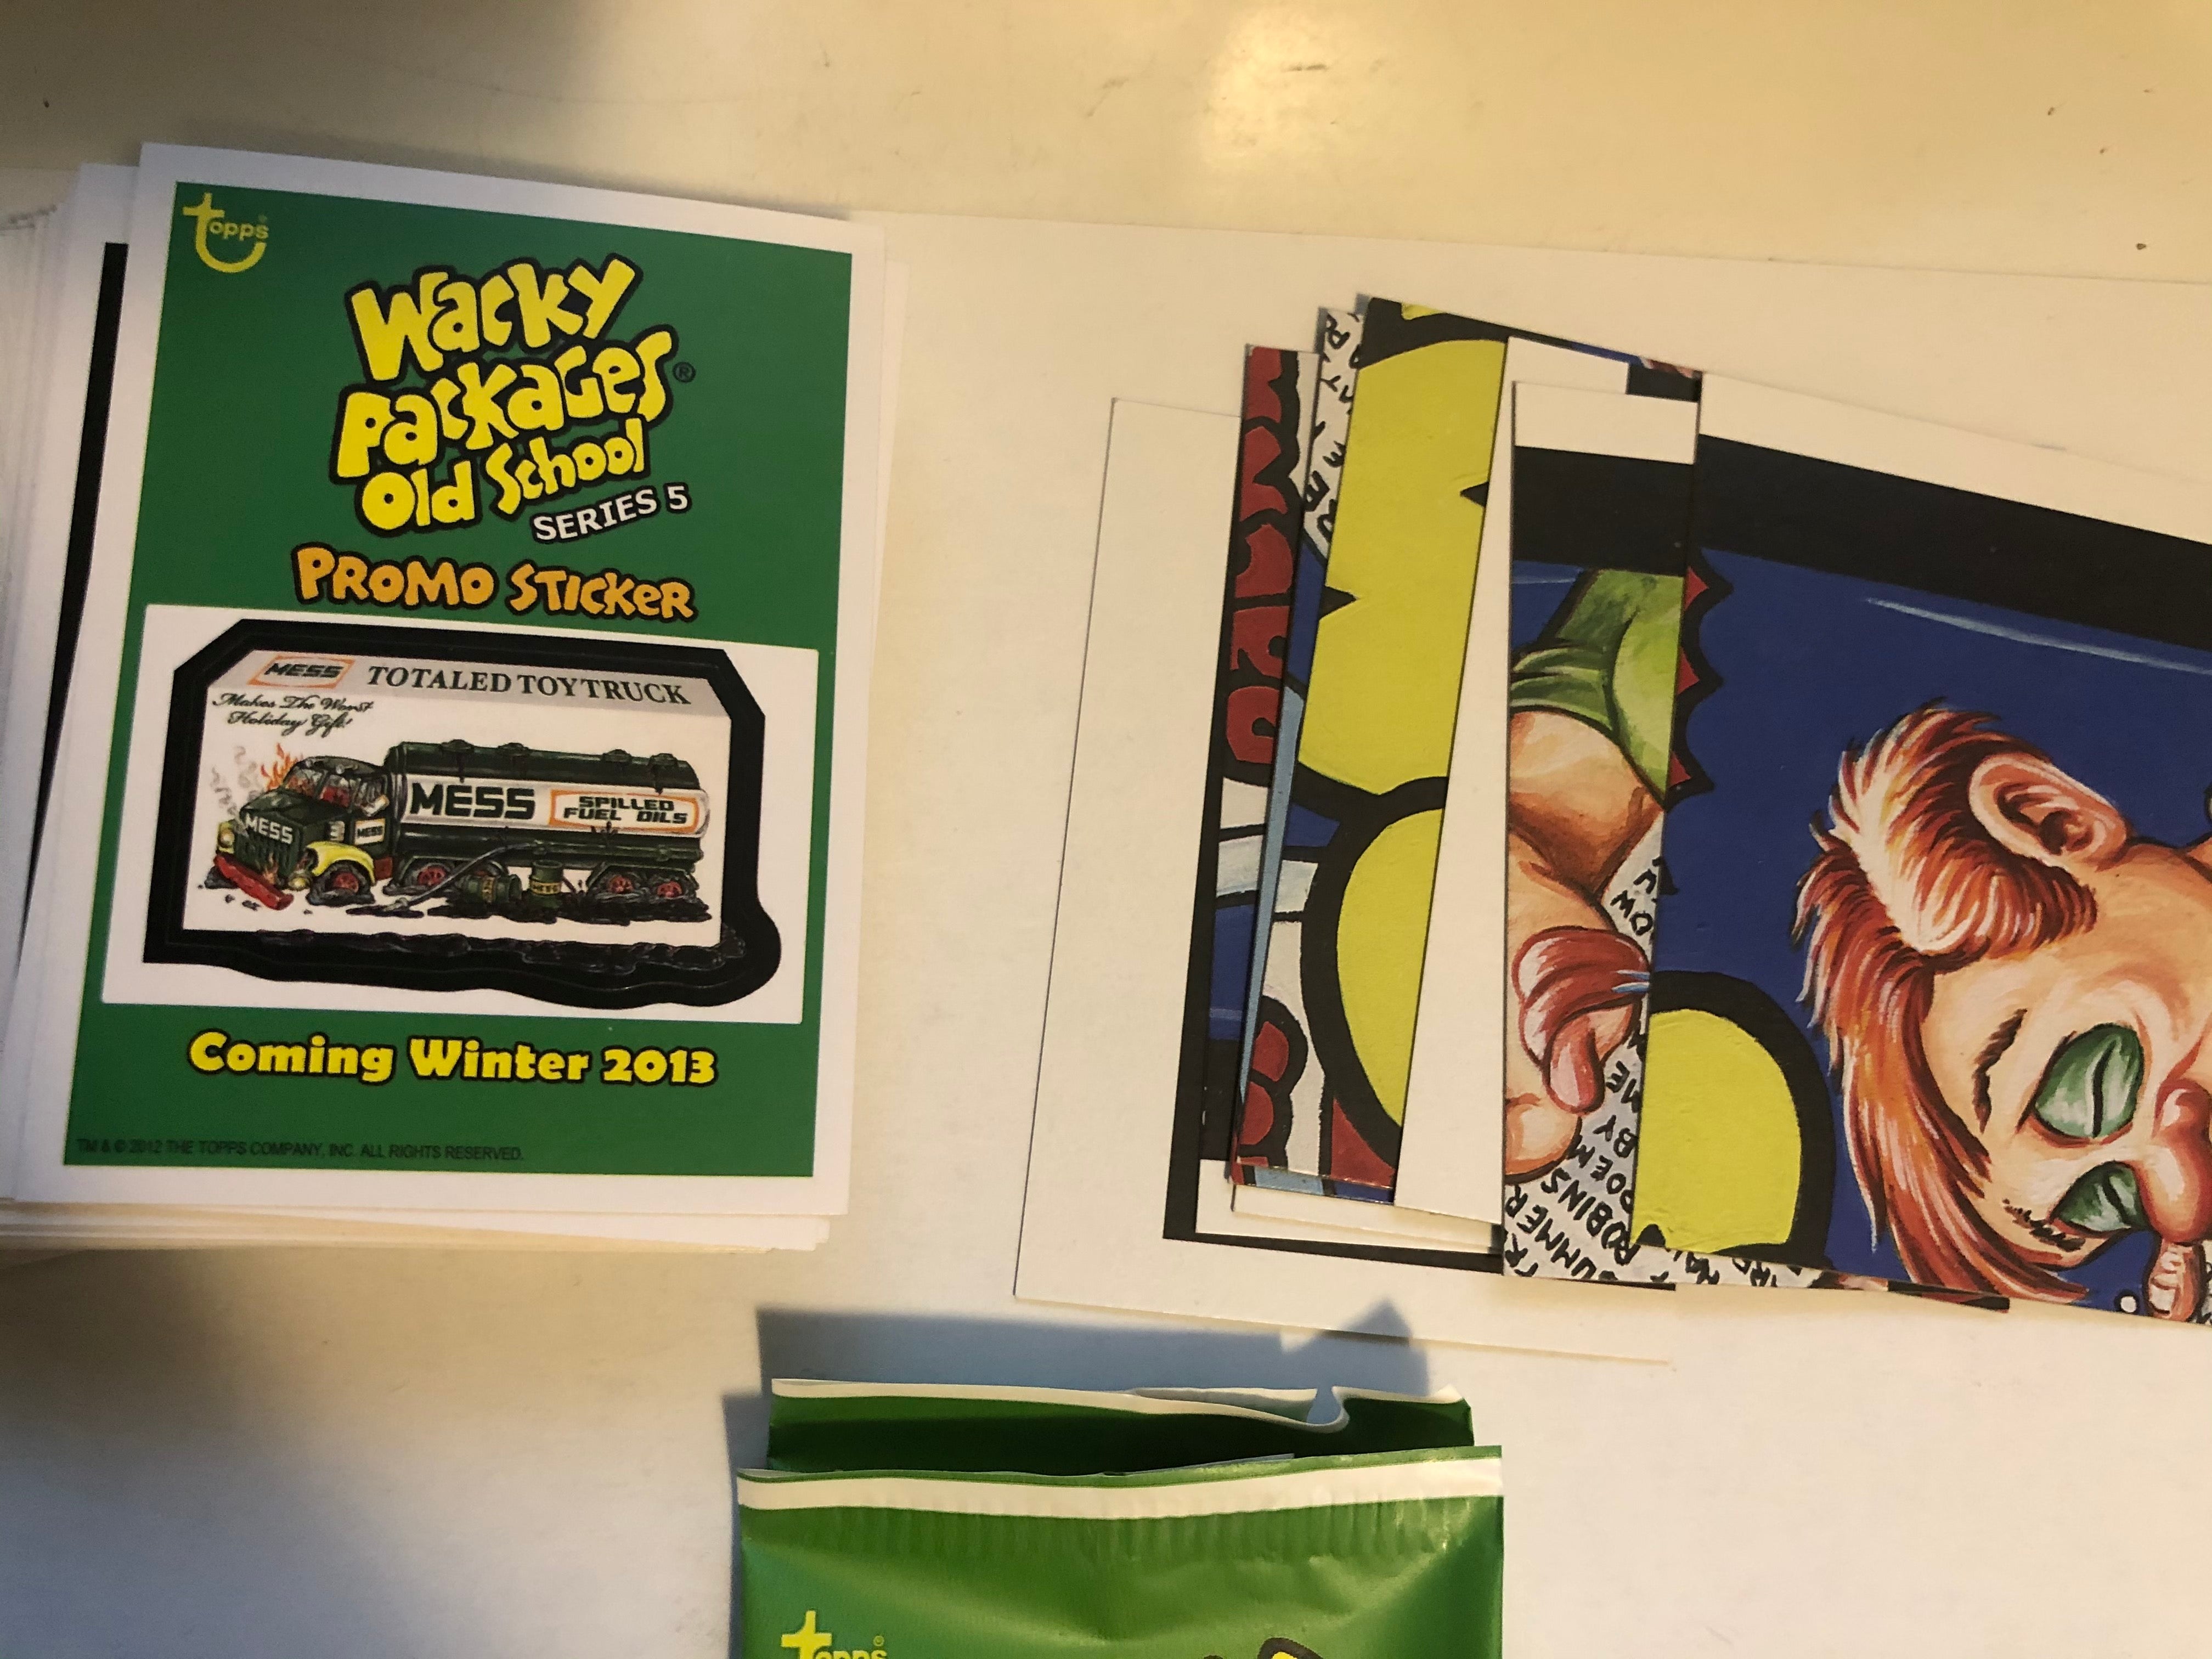 Wacky Packages old school stickers set 2013